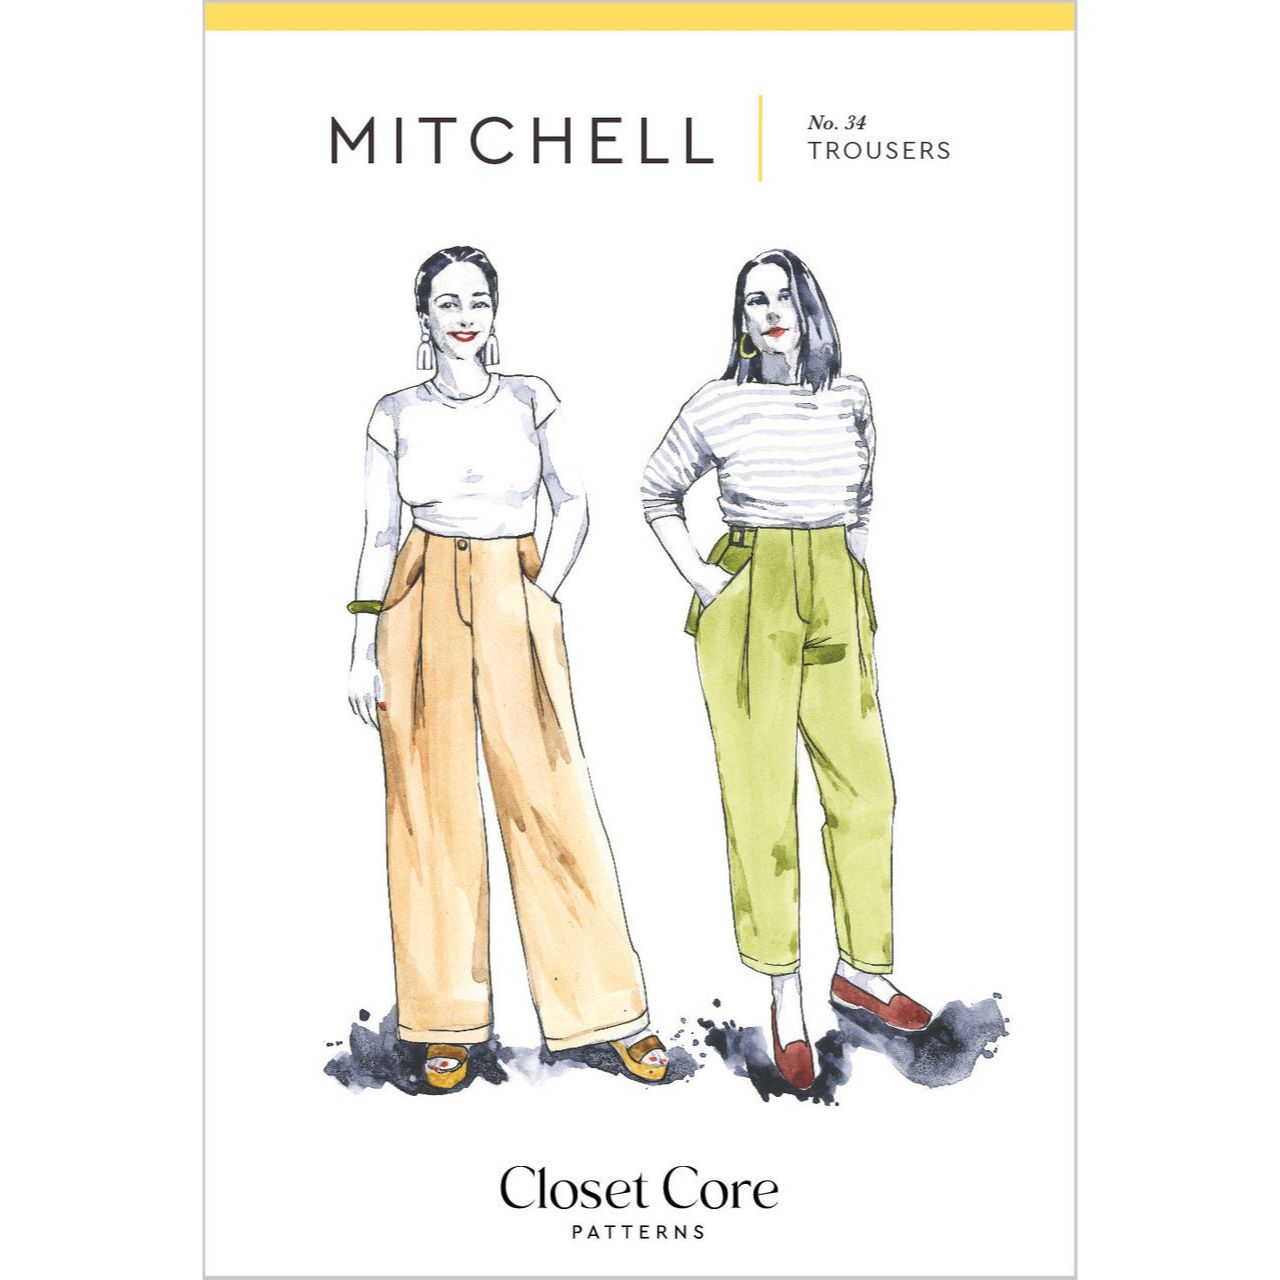 Mitchell_Trousers_By_Closet_Core_Patterns_cover